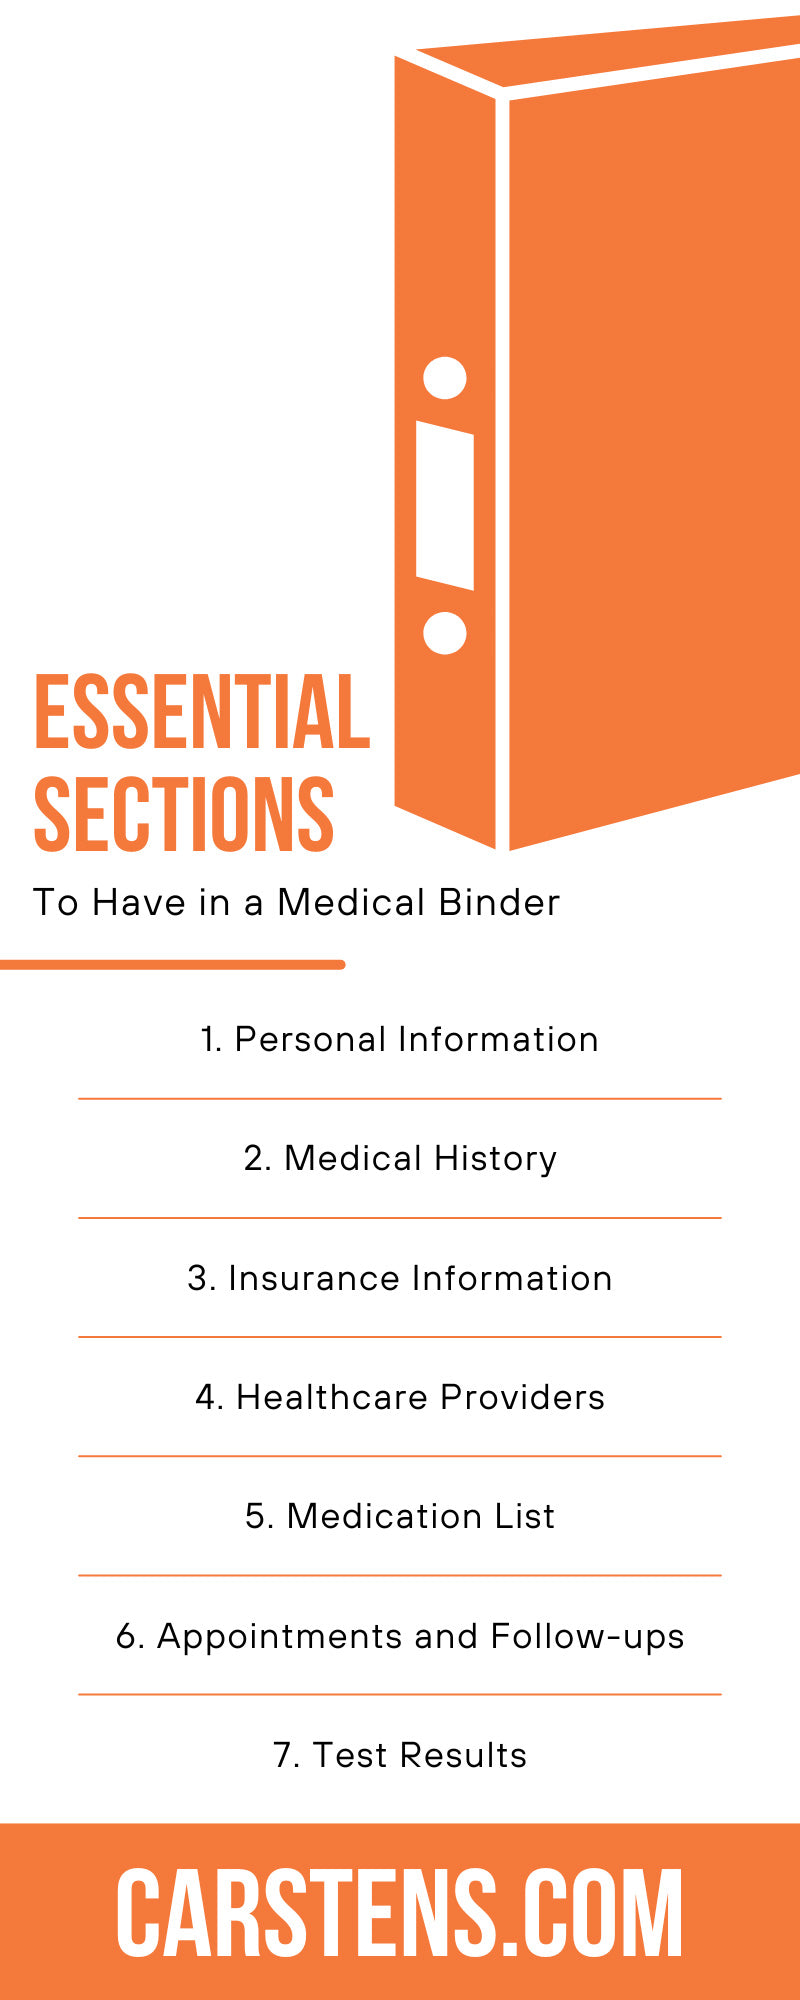 10 Essential Sections To Have in a Medical Binder